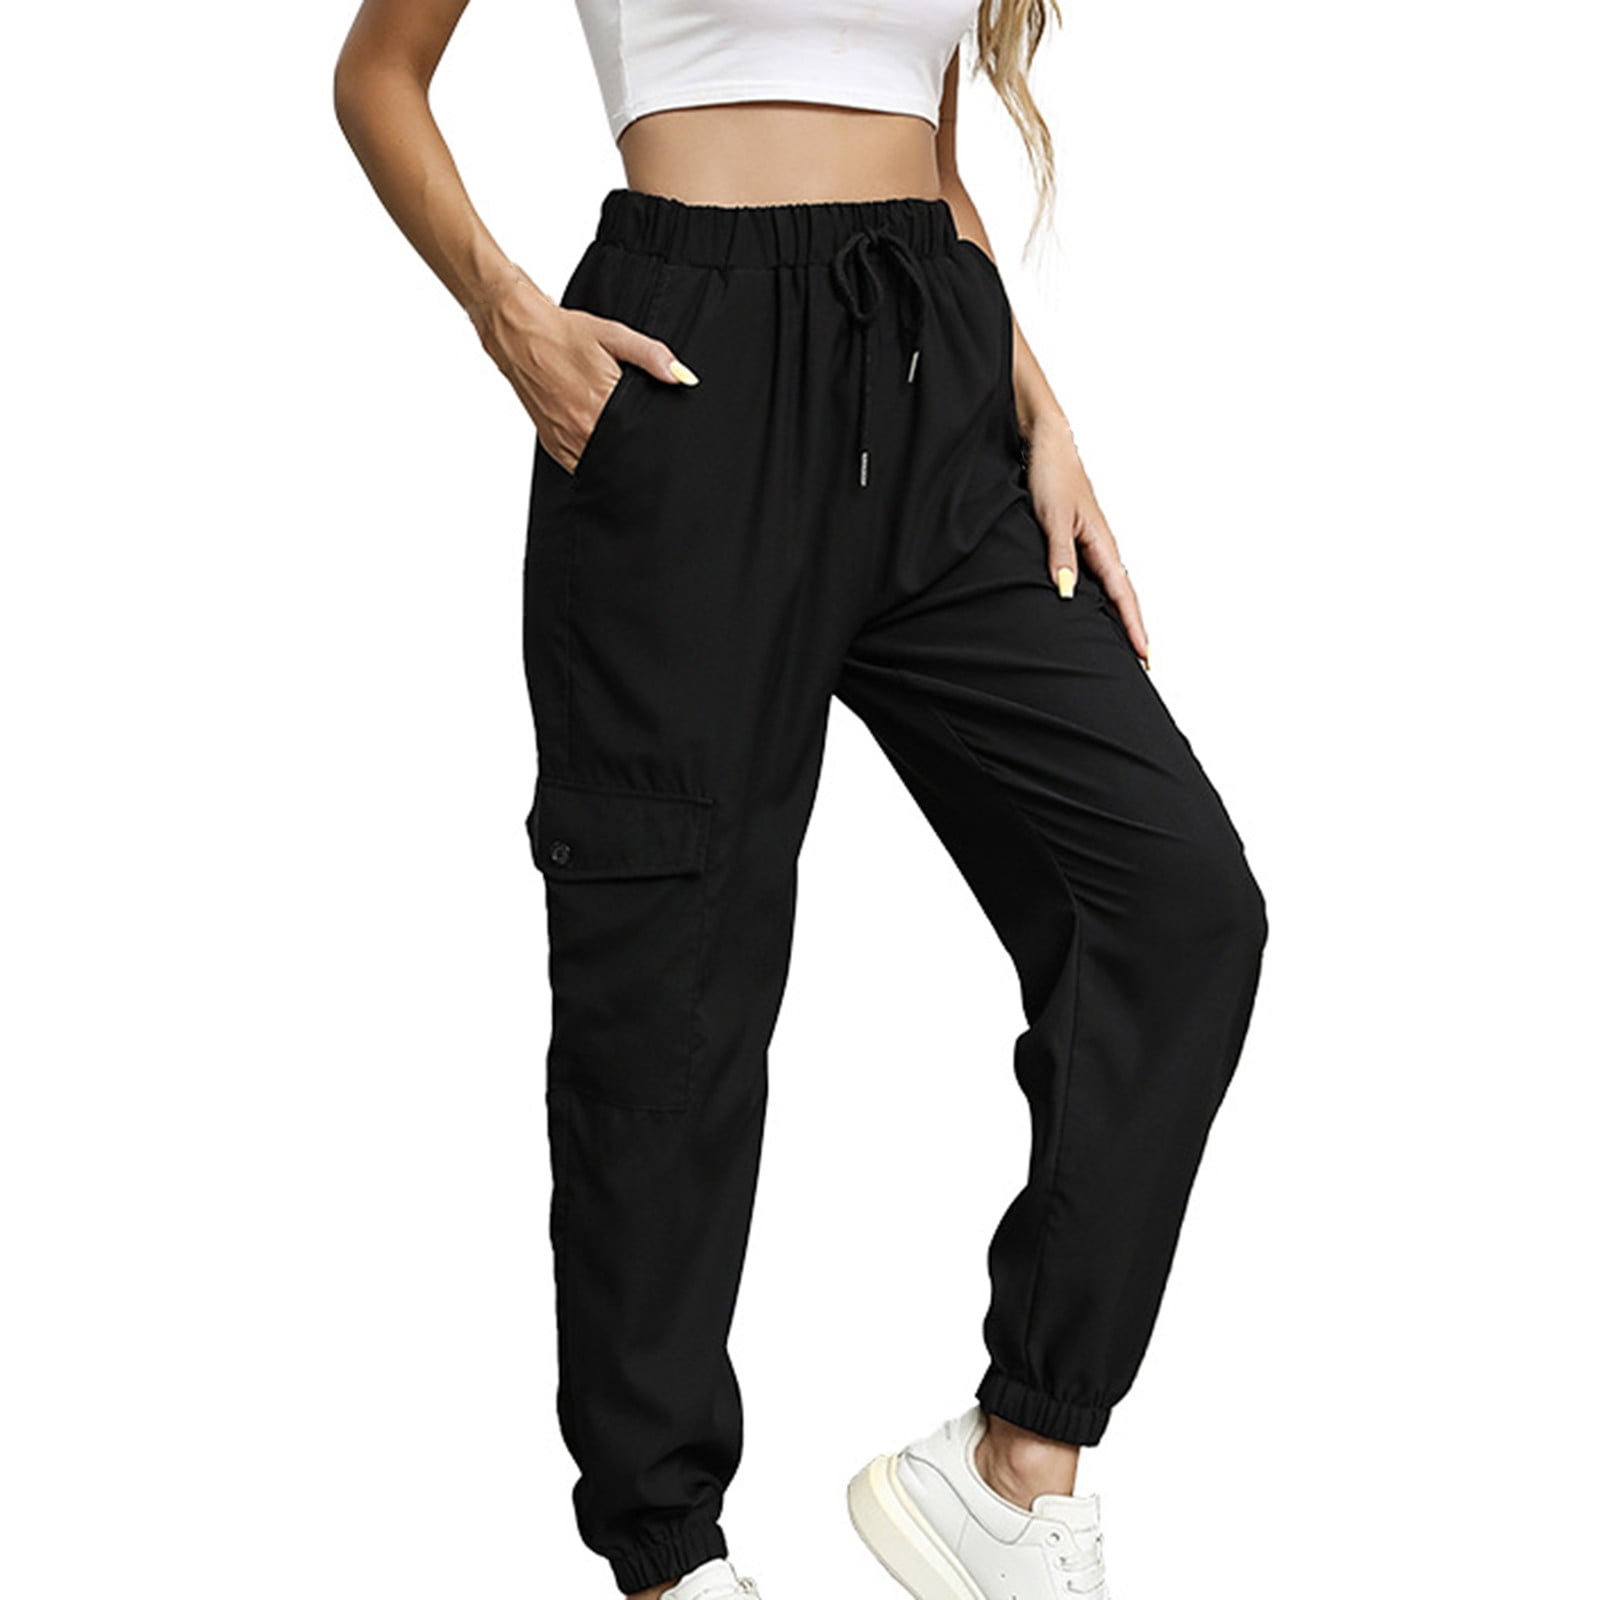 KIJBLAE Women's Bottoms Fashion Full Length Trousers Cargo Pants For Girls  Color Block Comfy Lounge Casual Pants Black L 